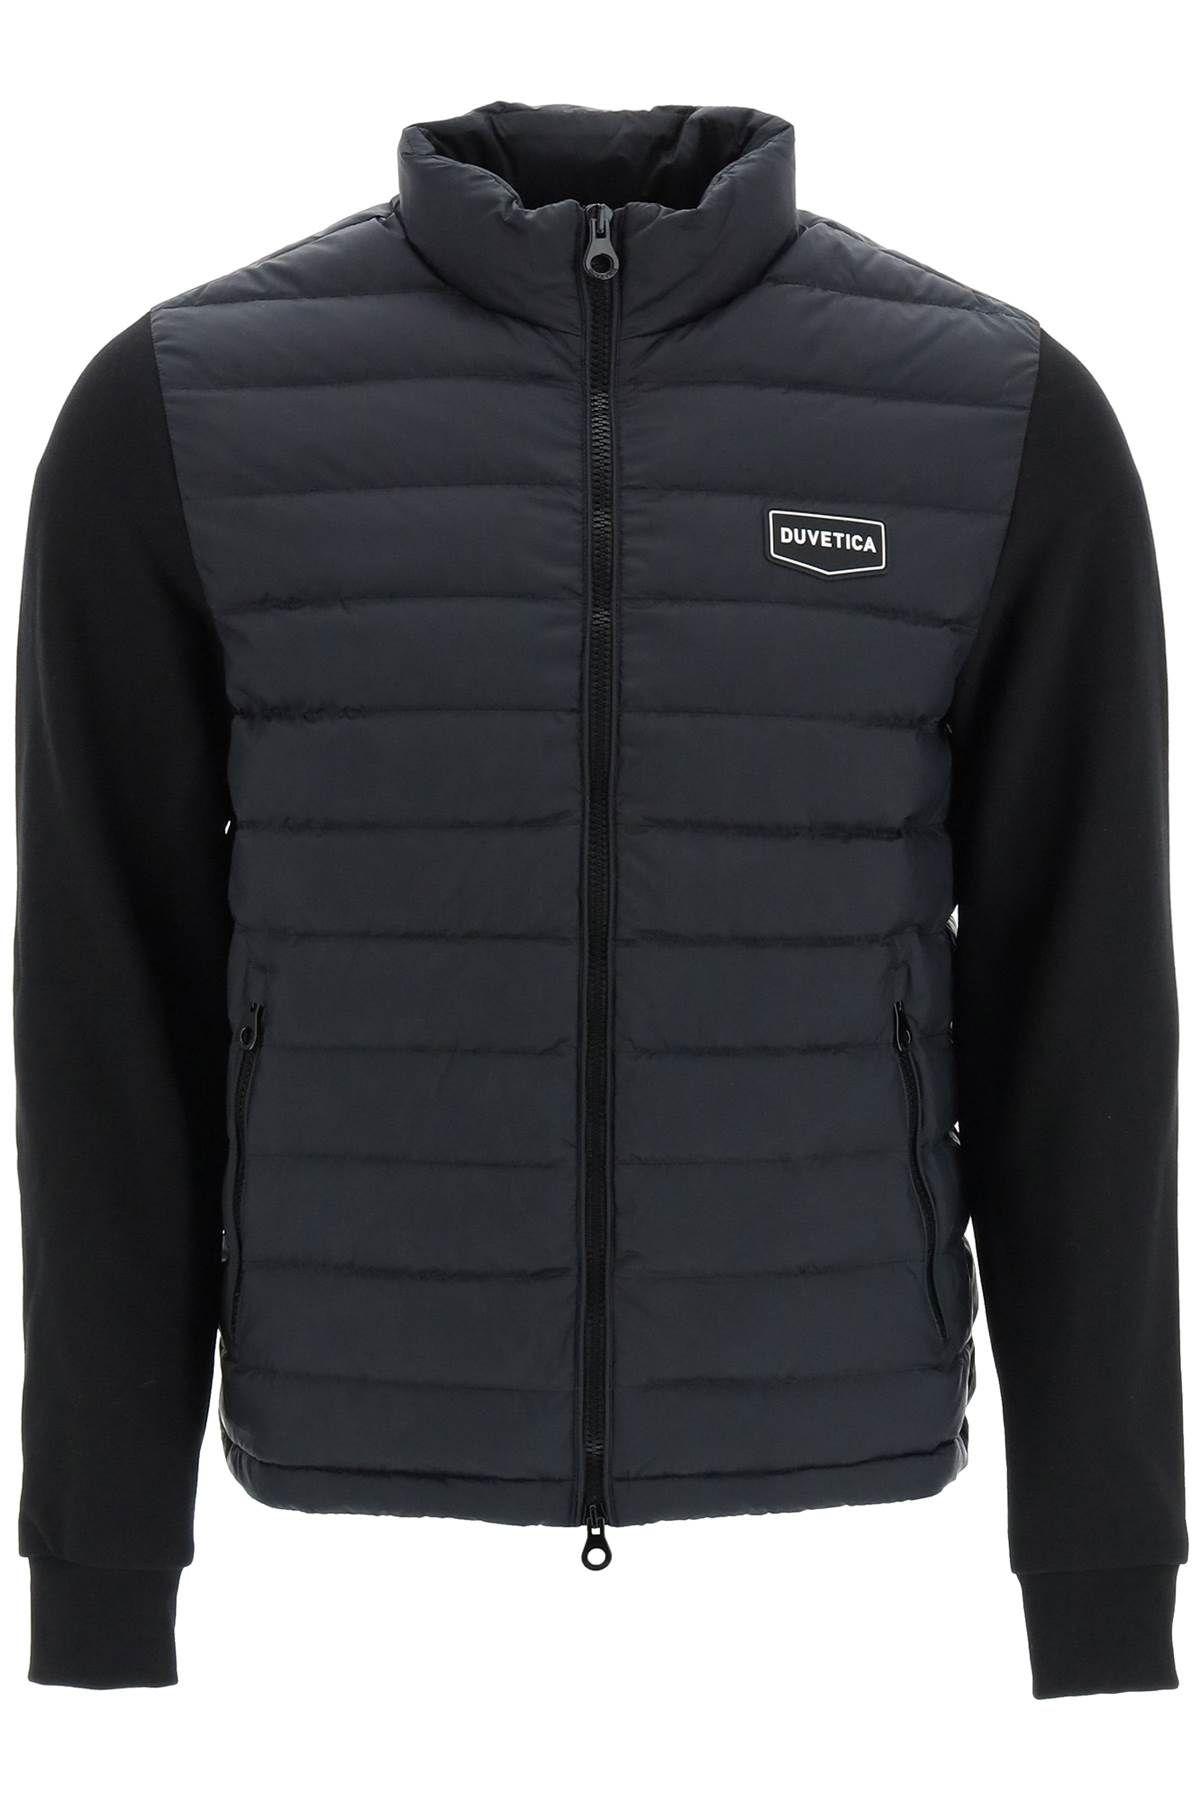 Duvetica fossi Light Down Jacket With Jersey Sleeves